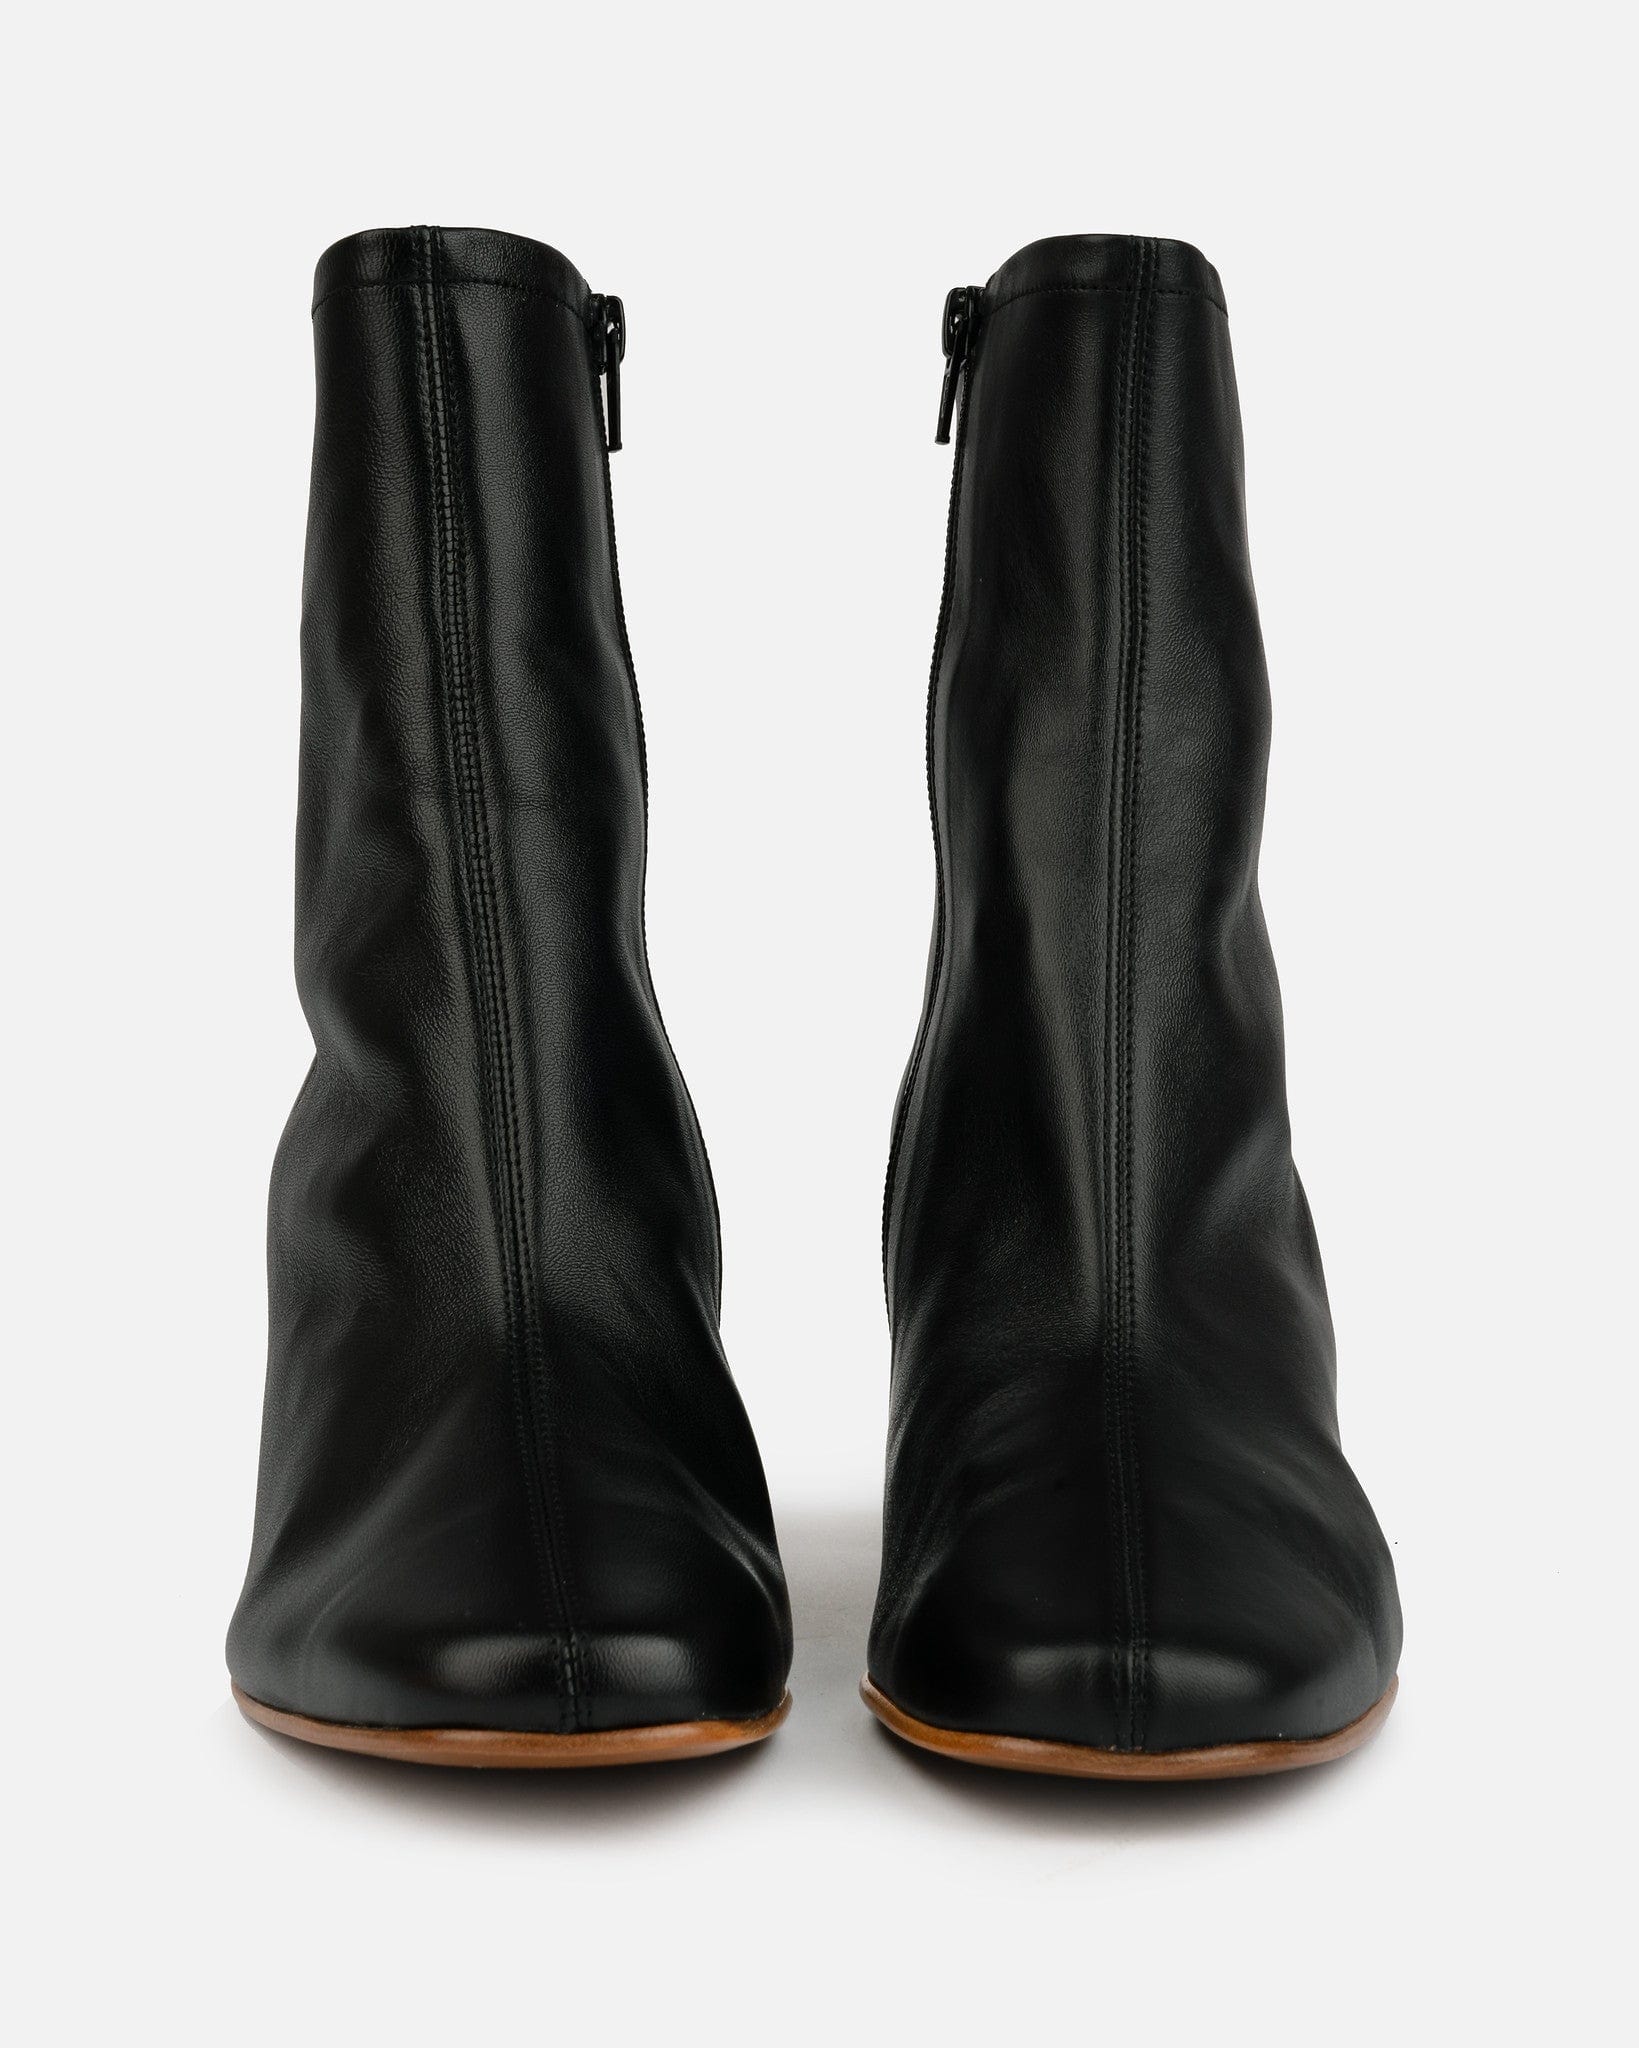 BY FAR Women Boots Sofia Boot in Black